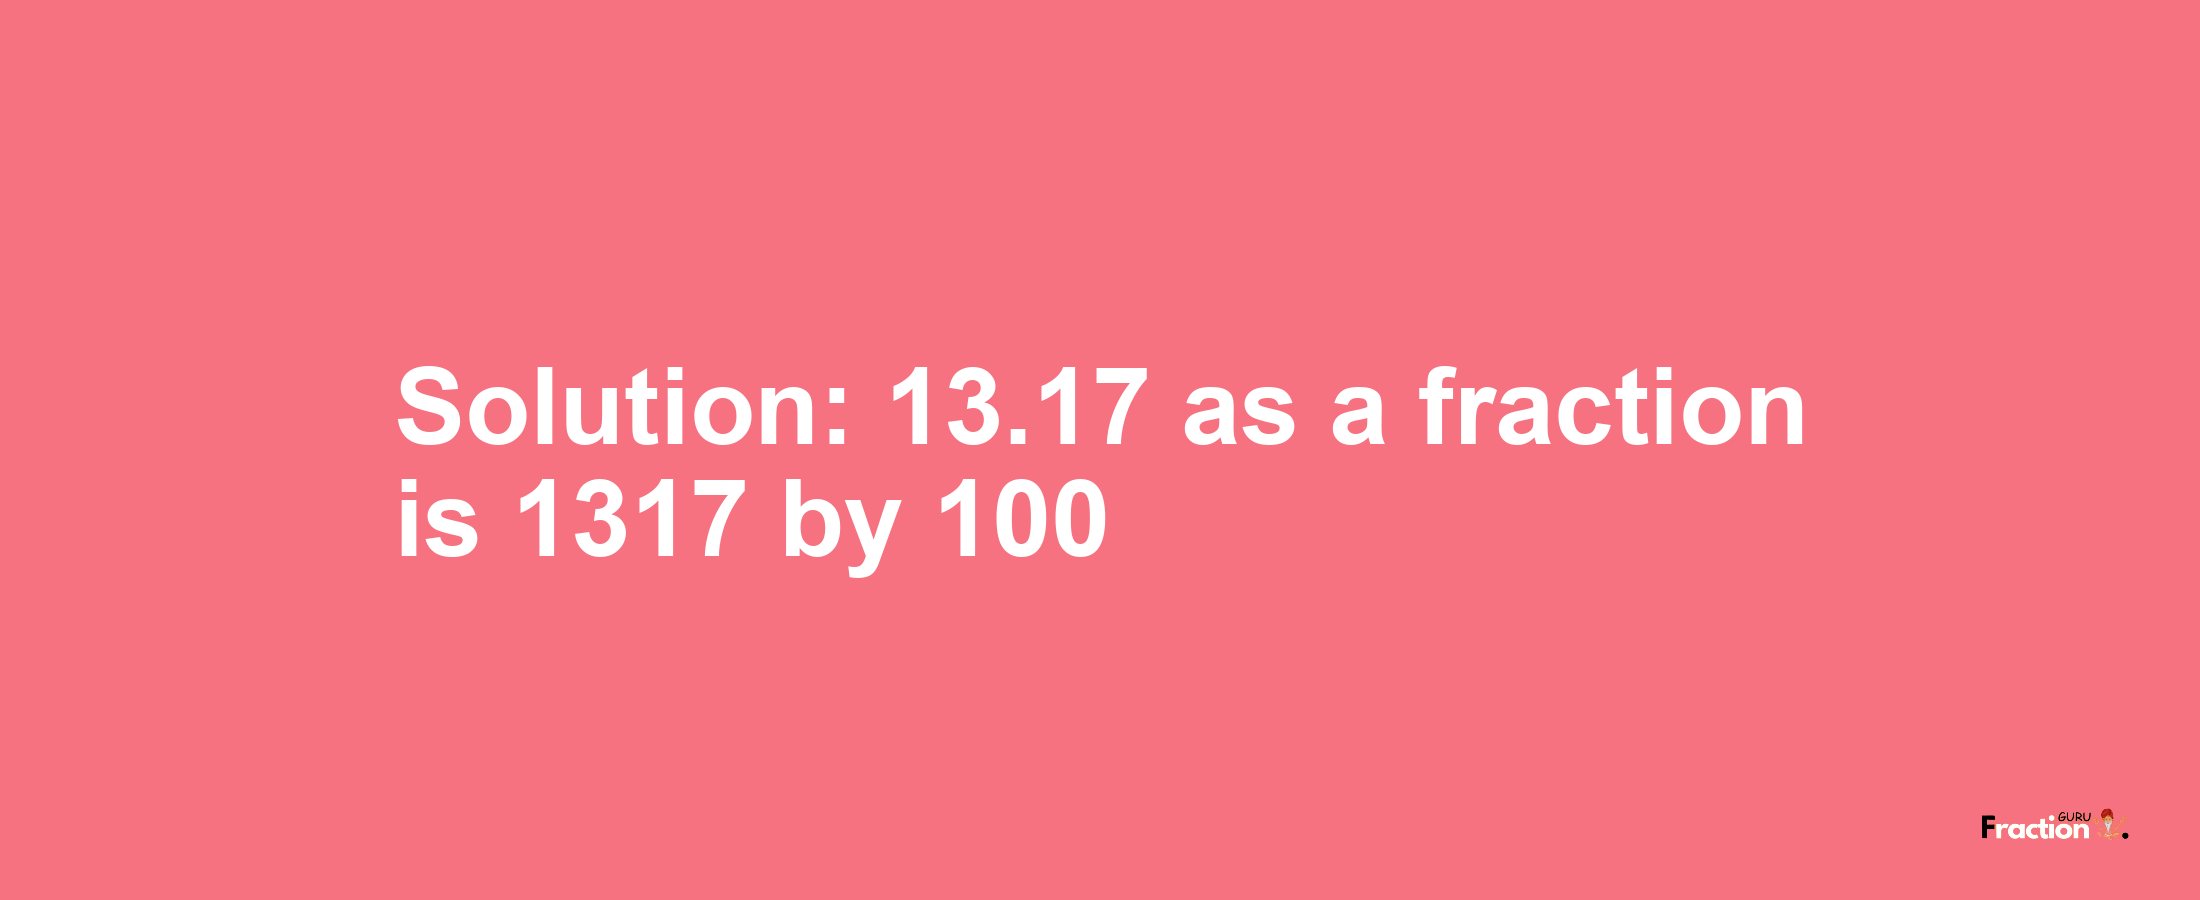 Solution:13.17 as a fraction is 1317/100